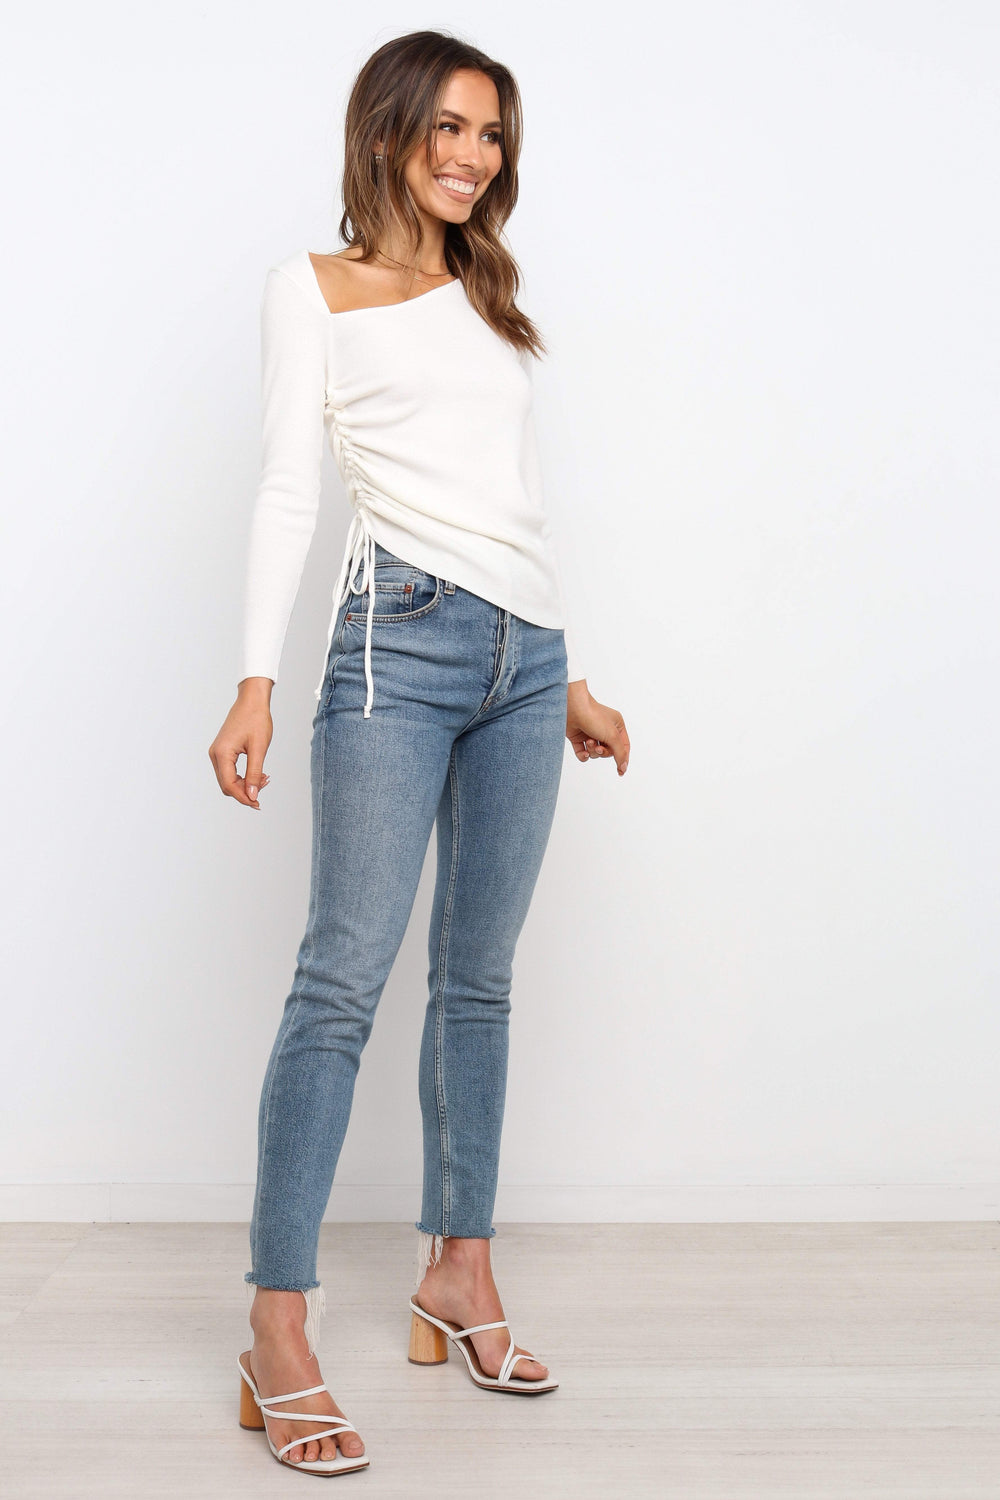 TOPS Amber Top - Ivory